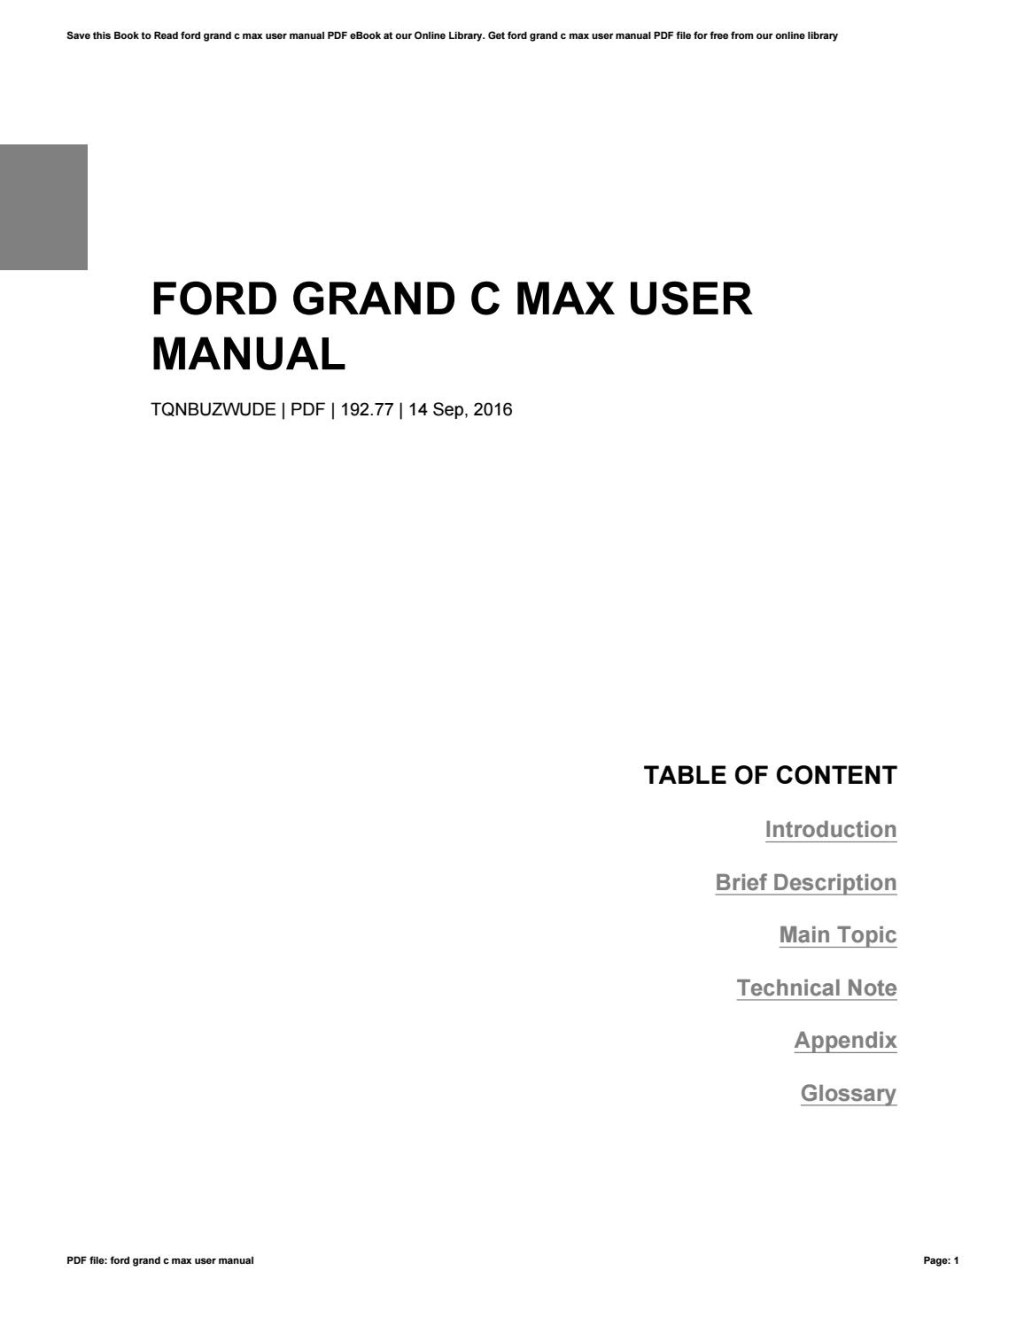 Picture of: Ford Grand C Max User Manual by petersonh – Issuu